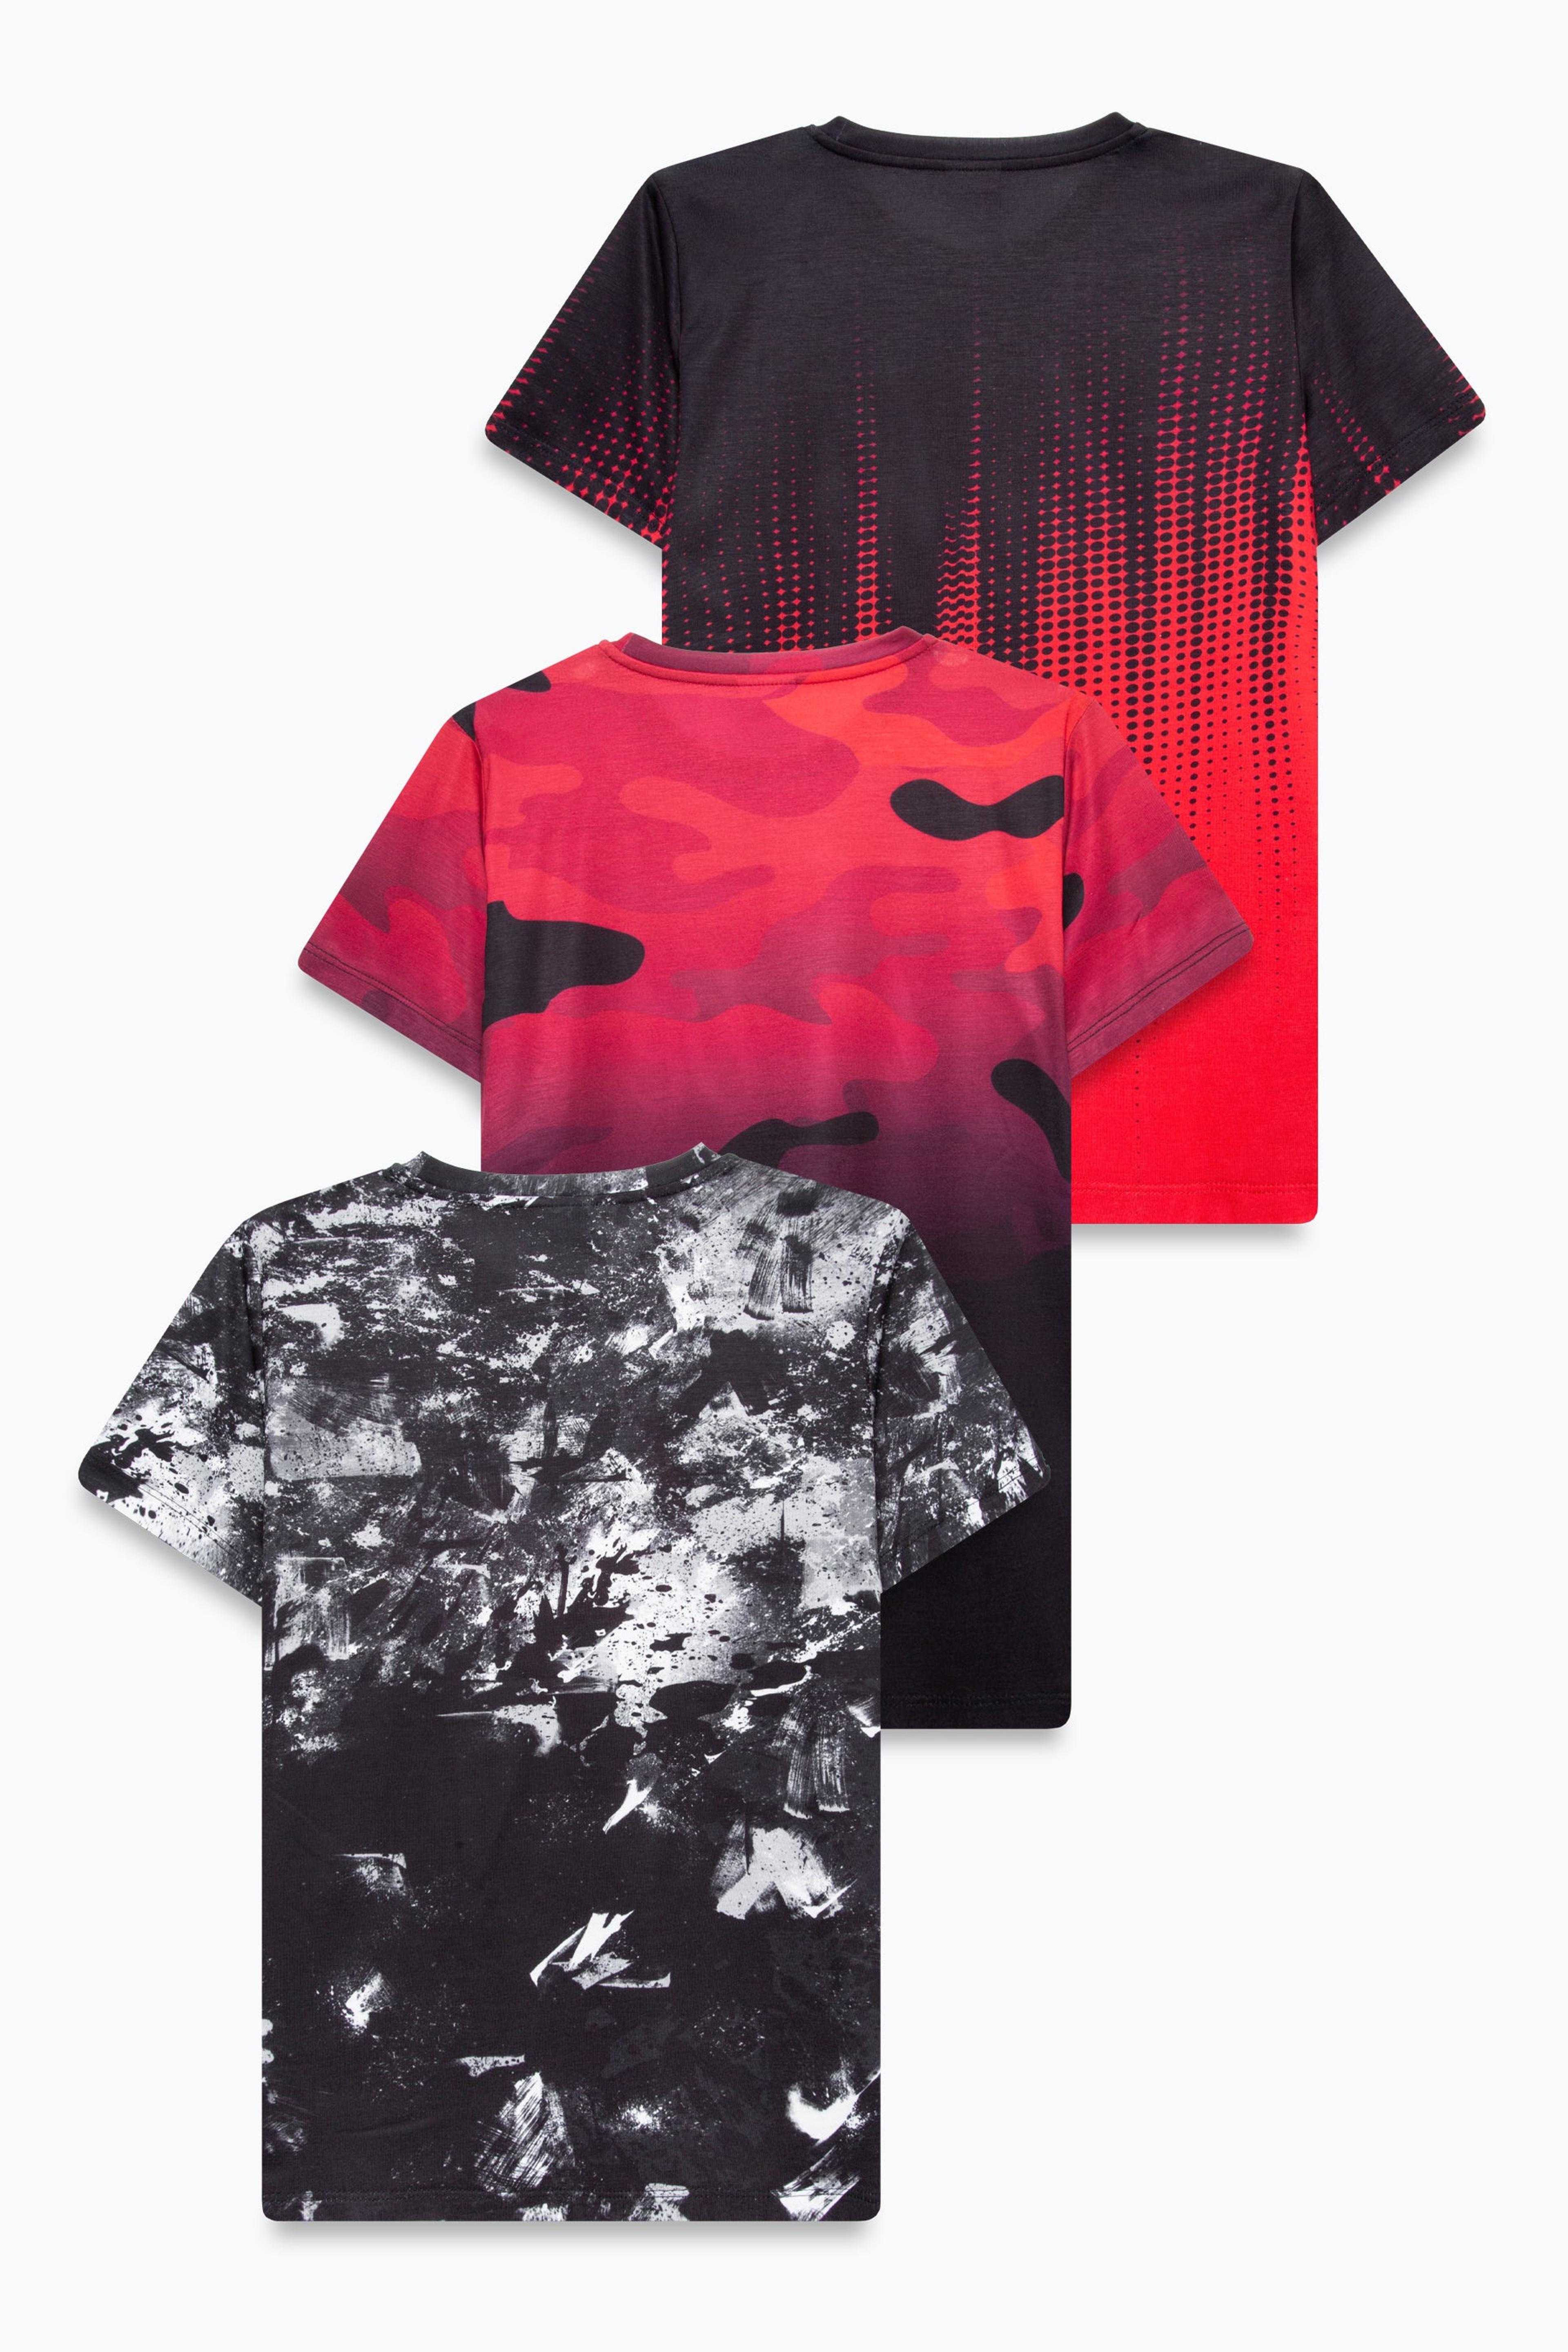 Alternate View 1 of HYPE BOYS DRIP & CAMO & MIST 3 PACK T-SHIRTS